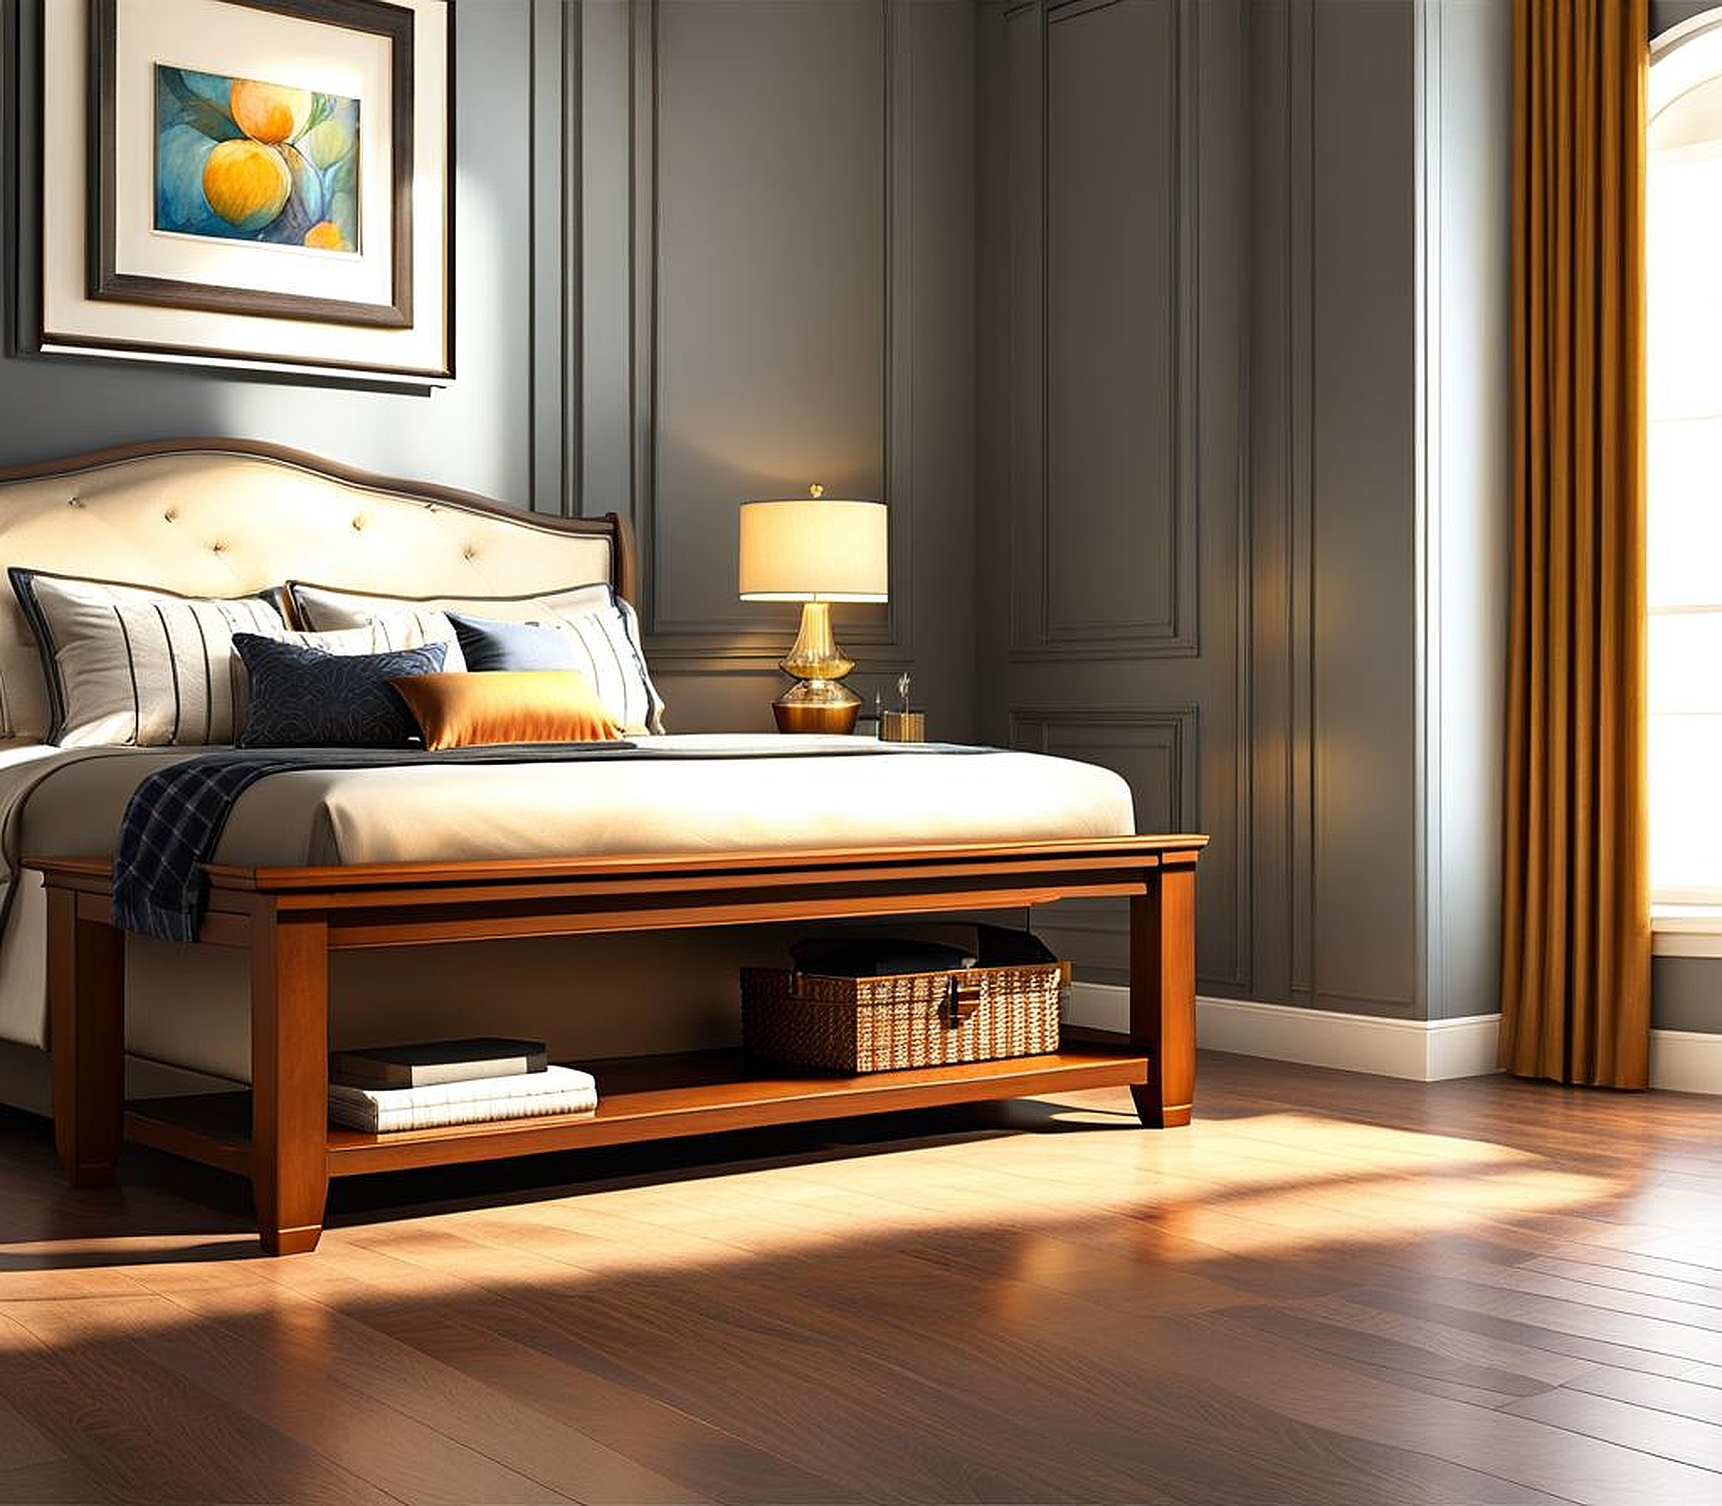 In Bedroom Design a 60 Inch End of Bed Bench Adds a Touch of Elegance